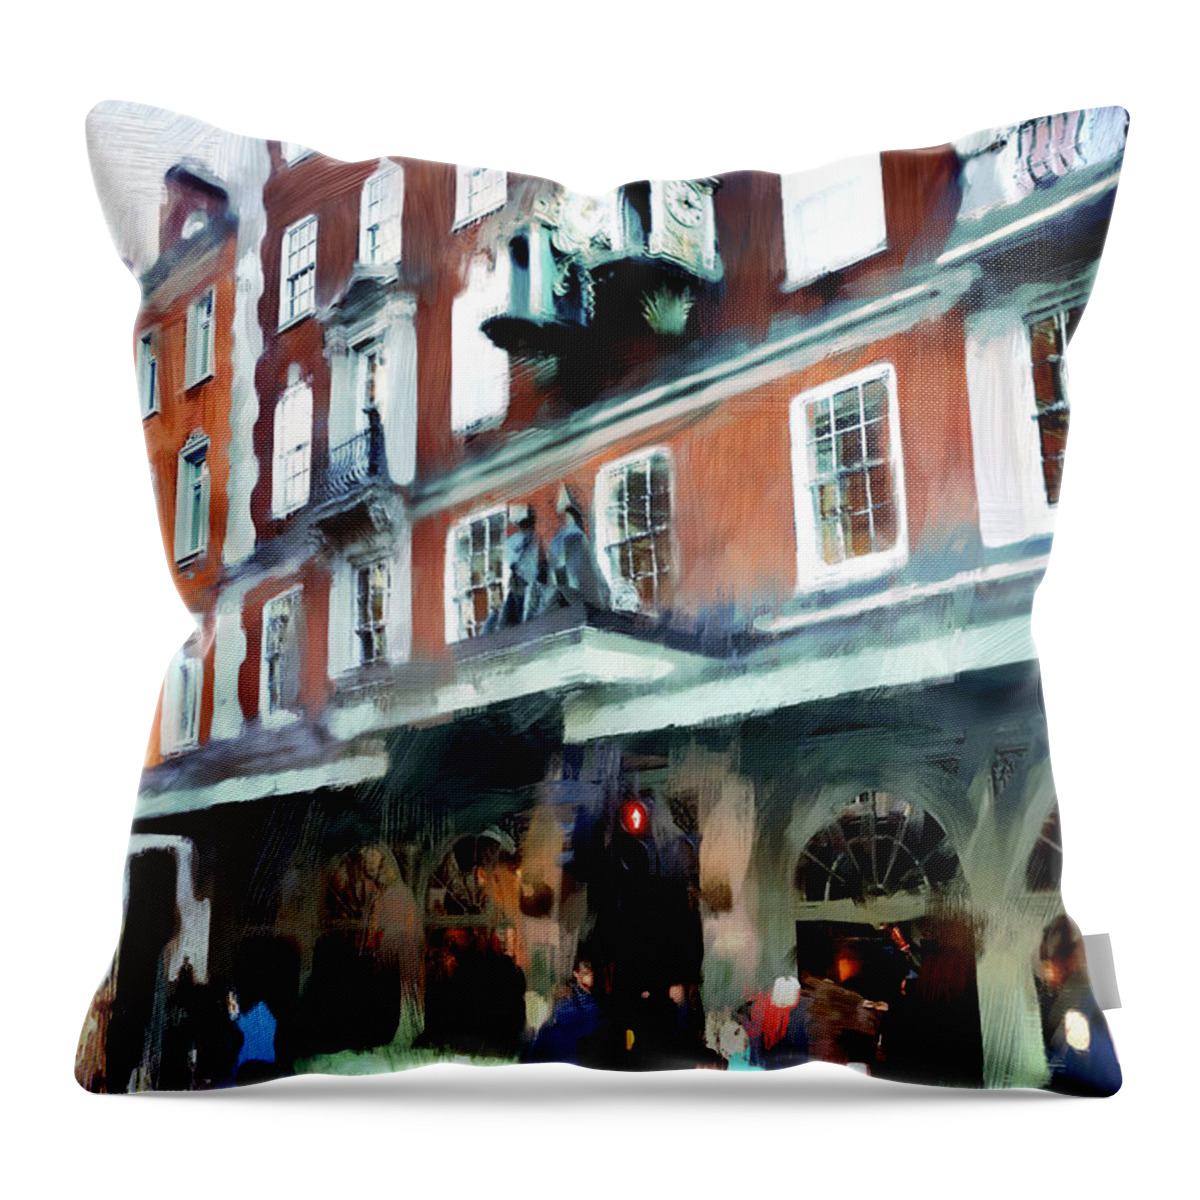 London Throw Pillow featuring the digital art The Grocer - Fortnum and Mason by Nicky Jameson